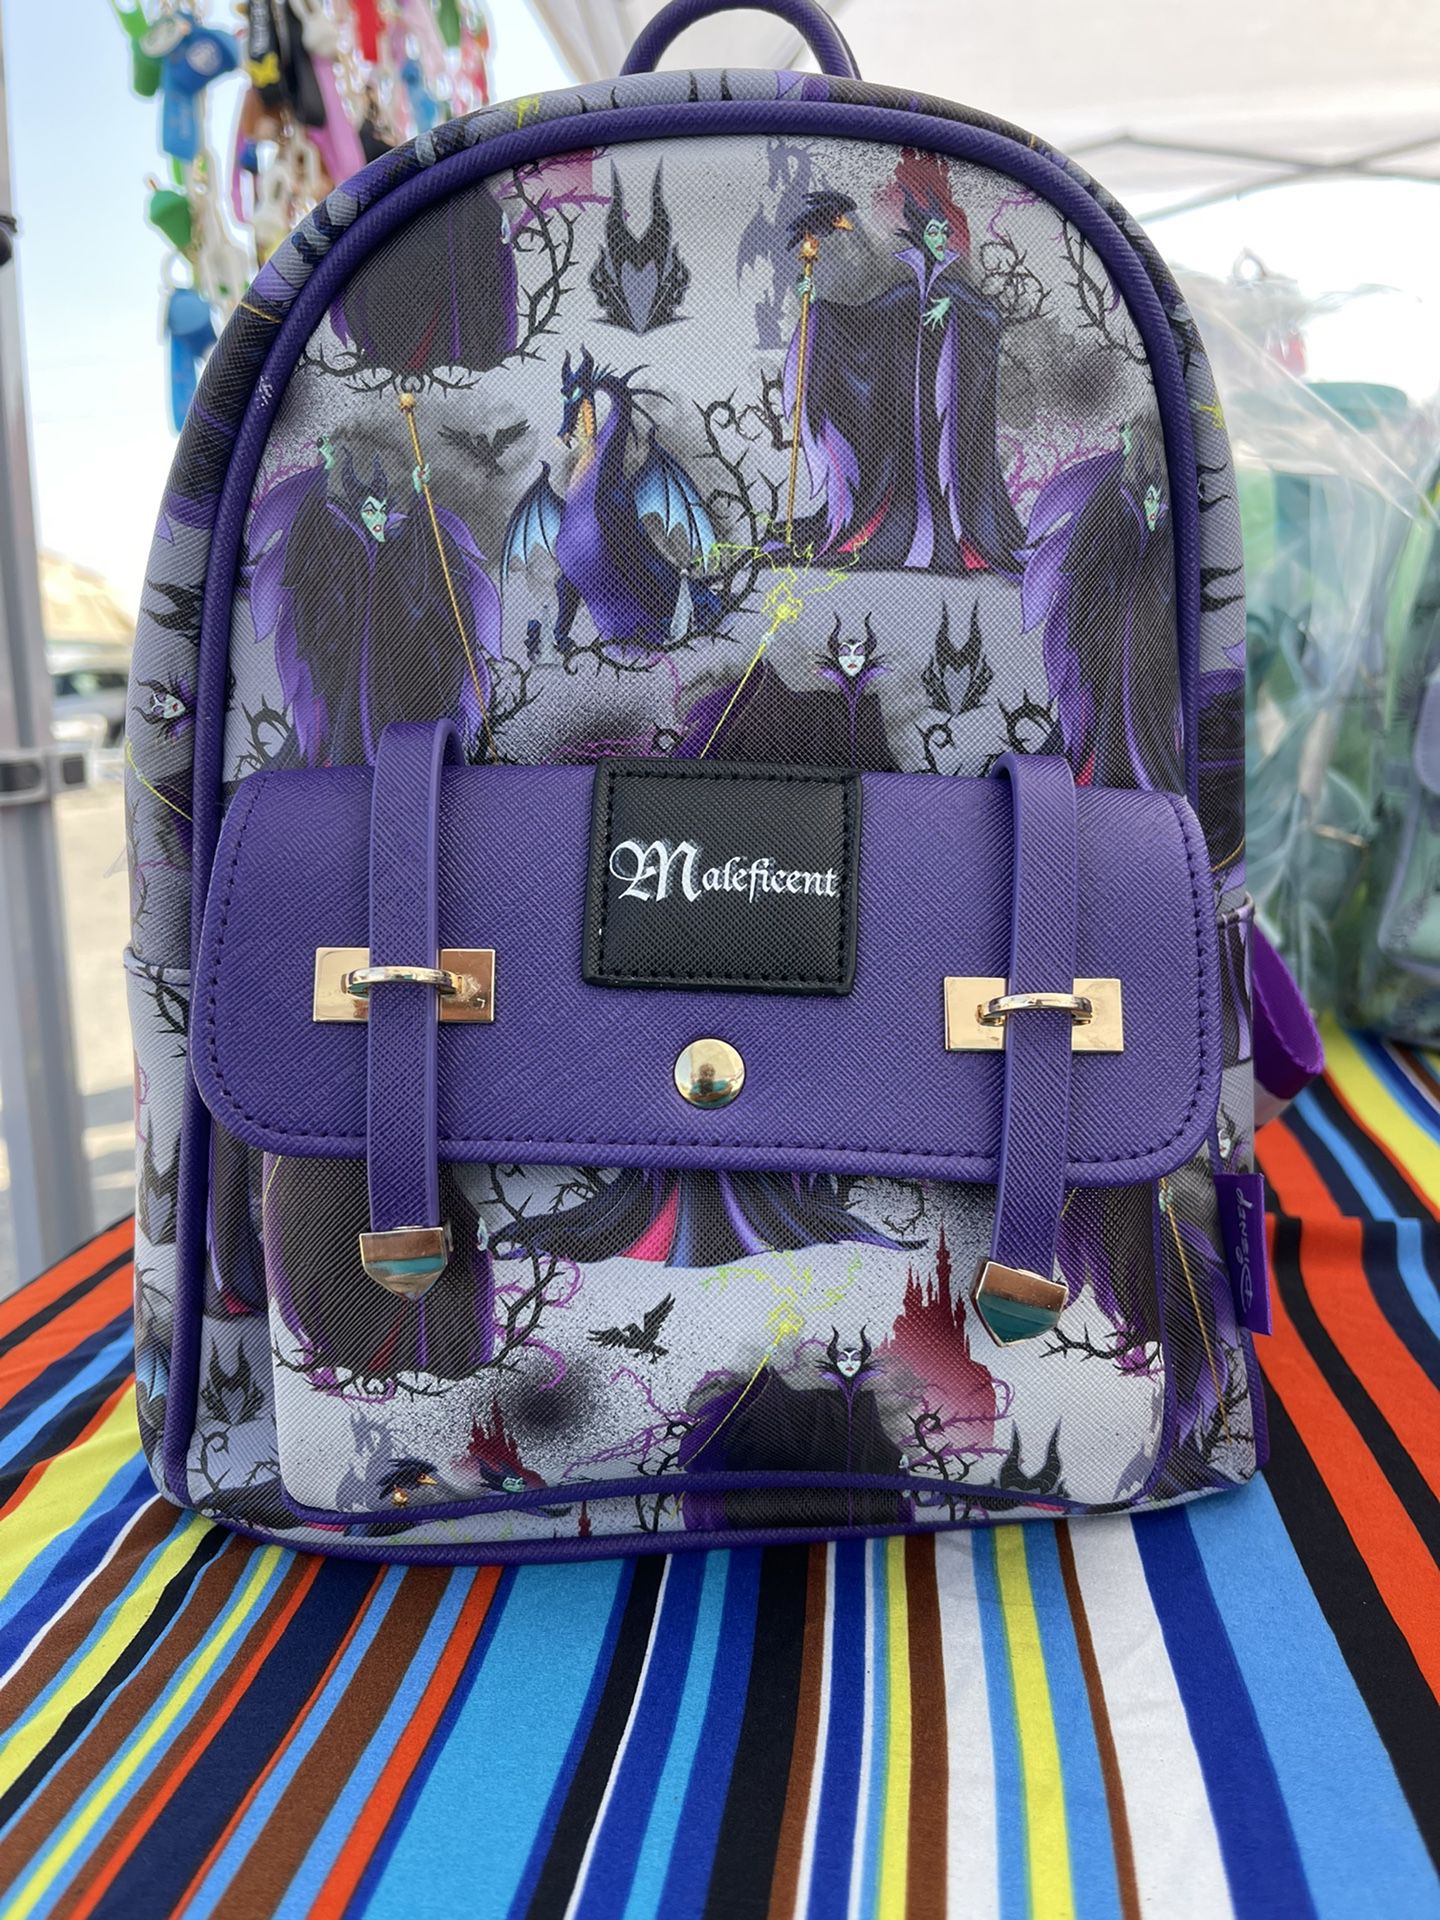 Maleficent 12 inch mini backpack by Disney